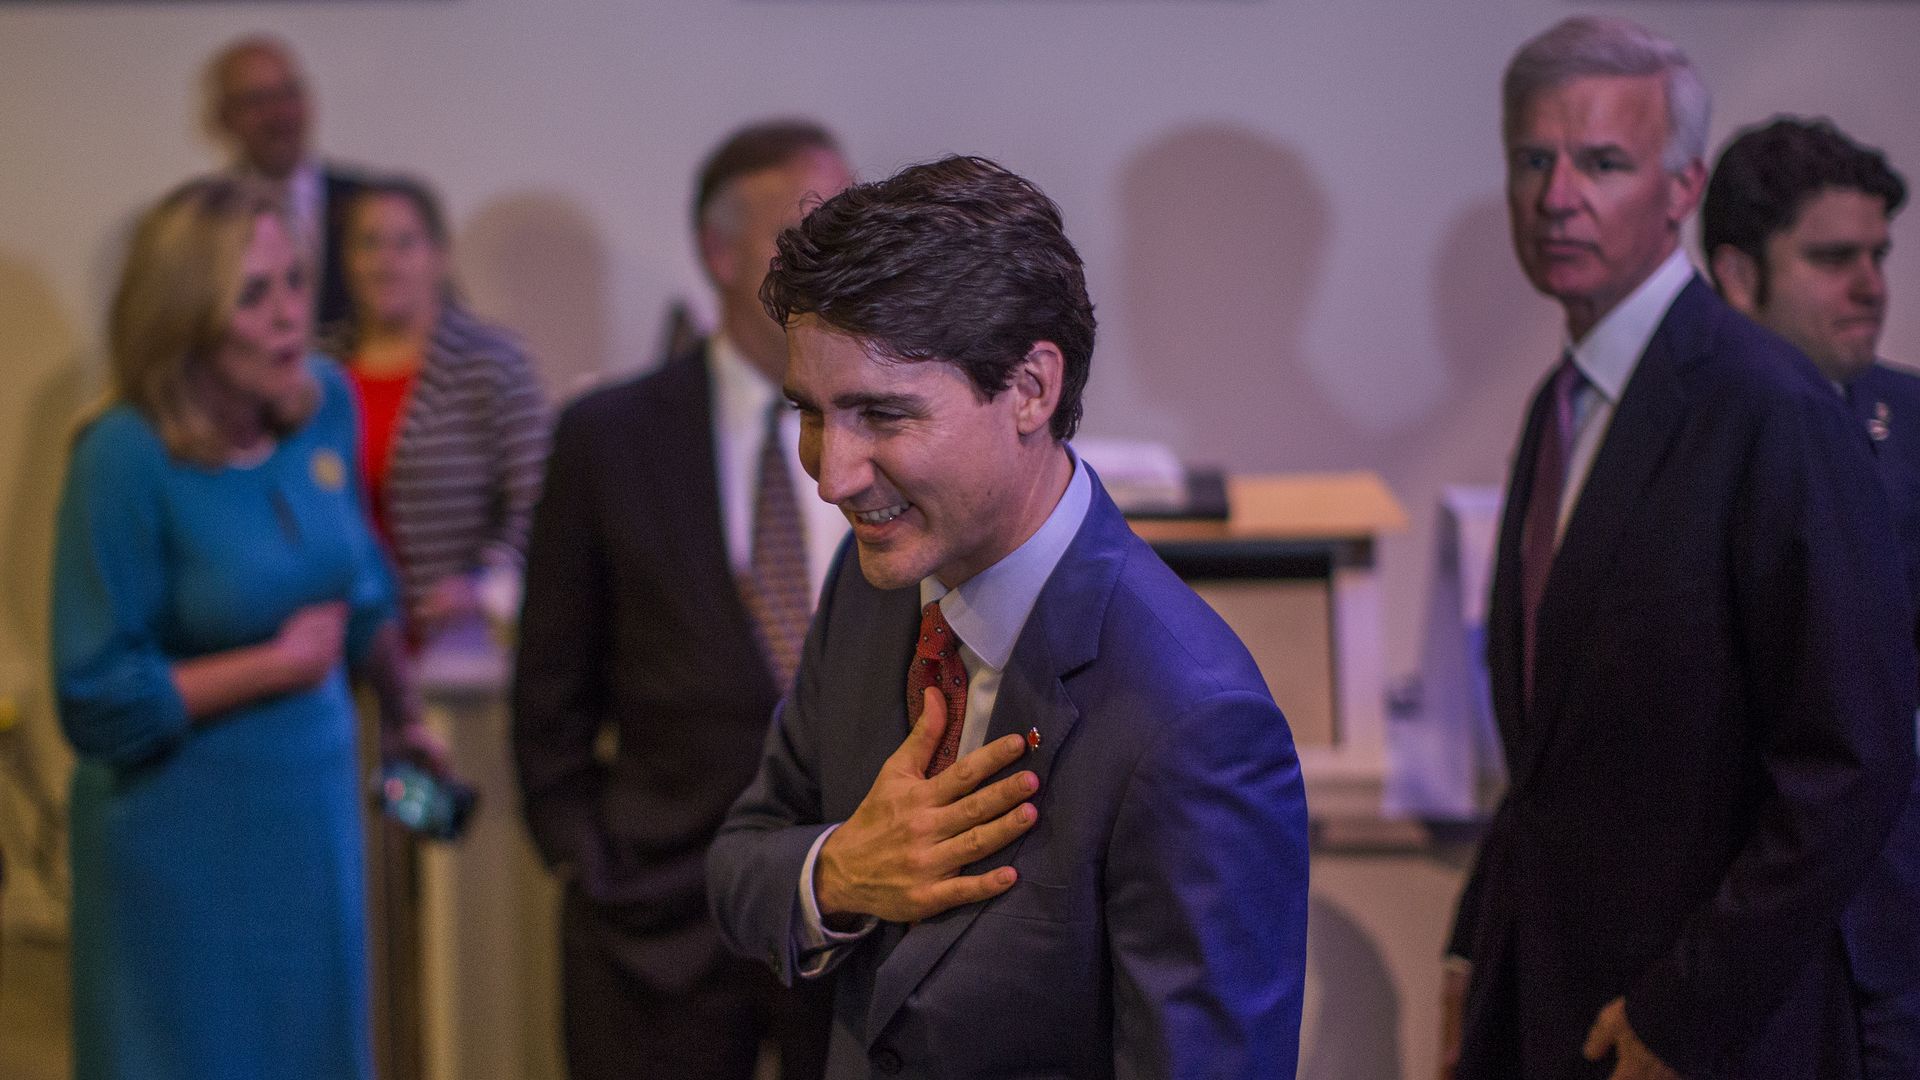 Justin Trudeau with his hand over his hear, wearing a dark grey suit with a red tie